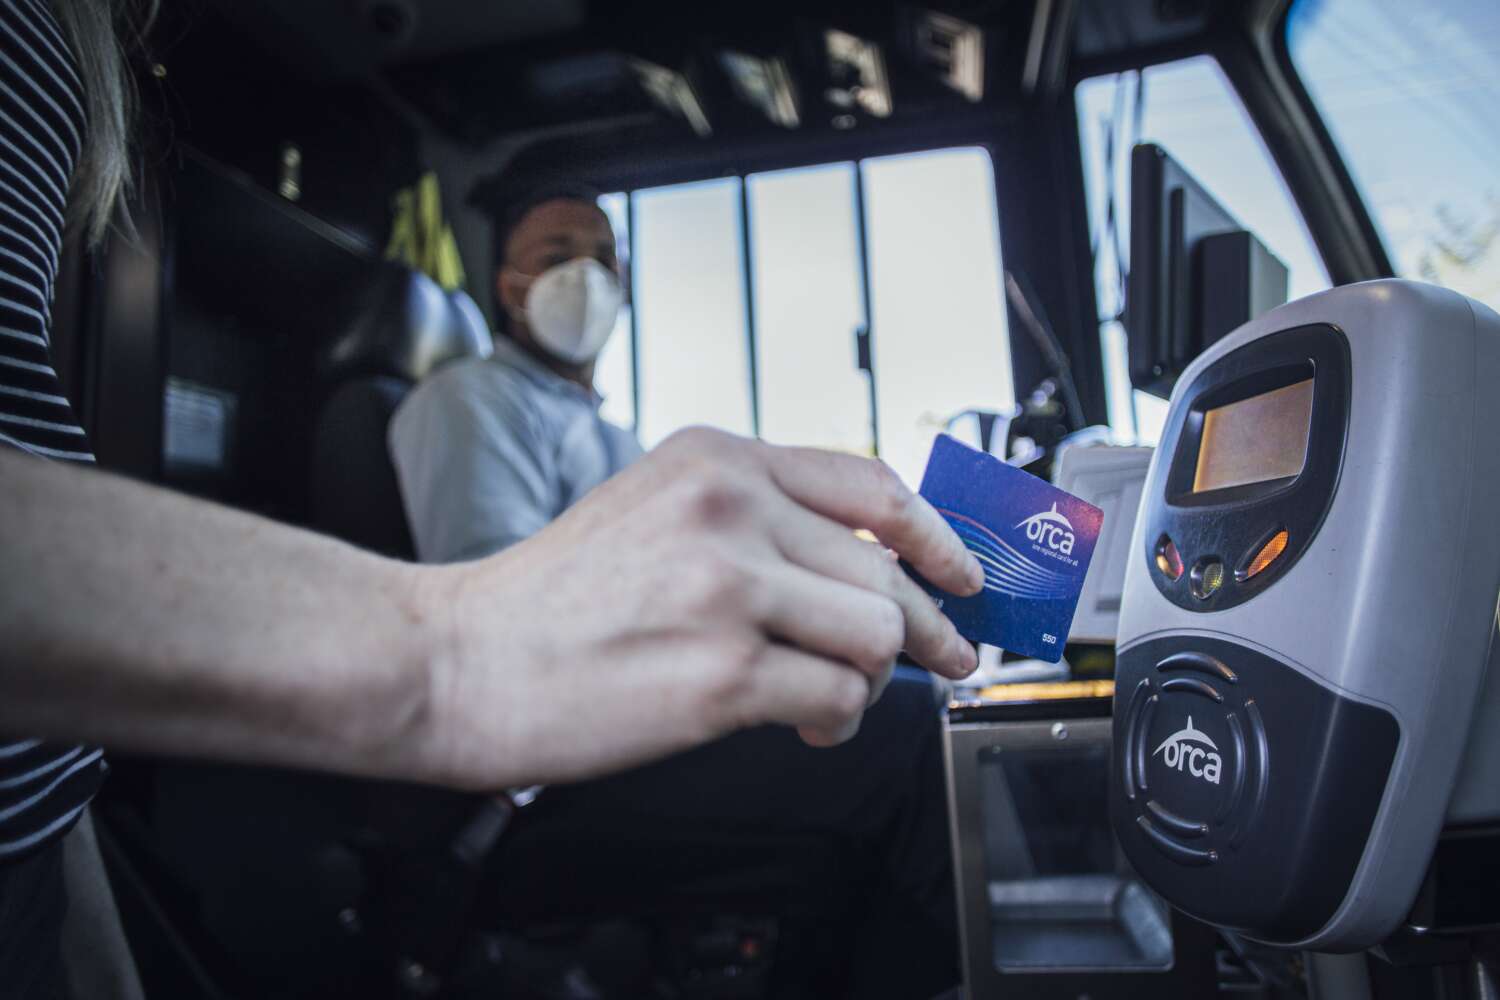 Rider uses ORCA card to ride the bus